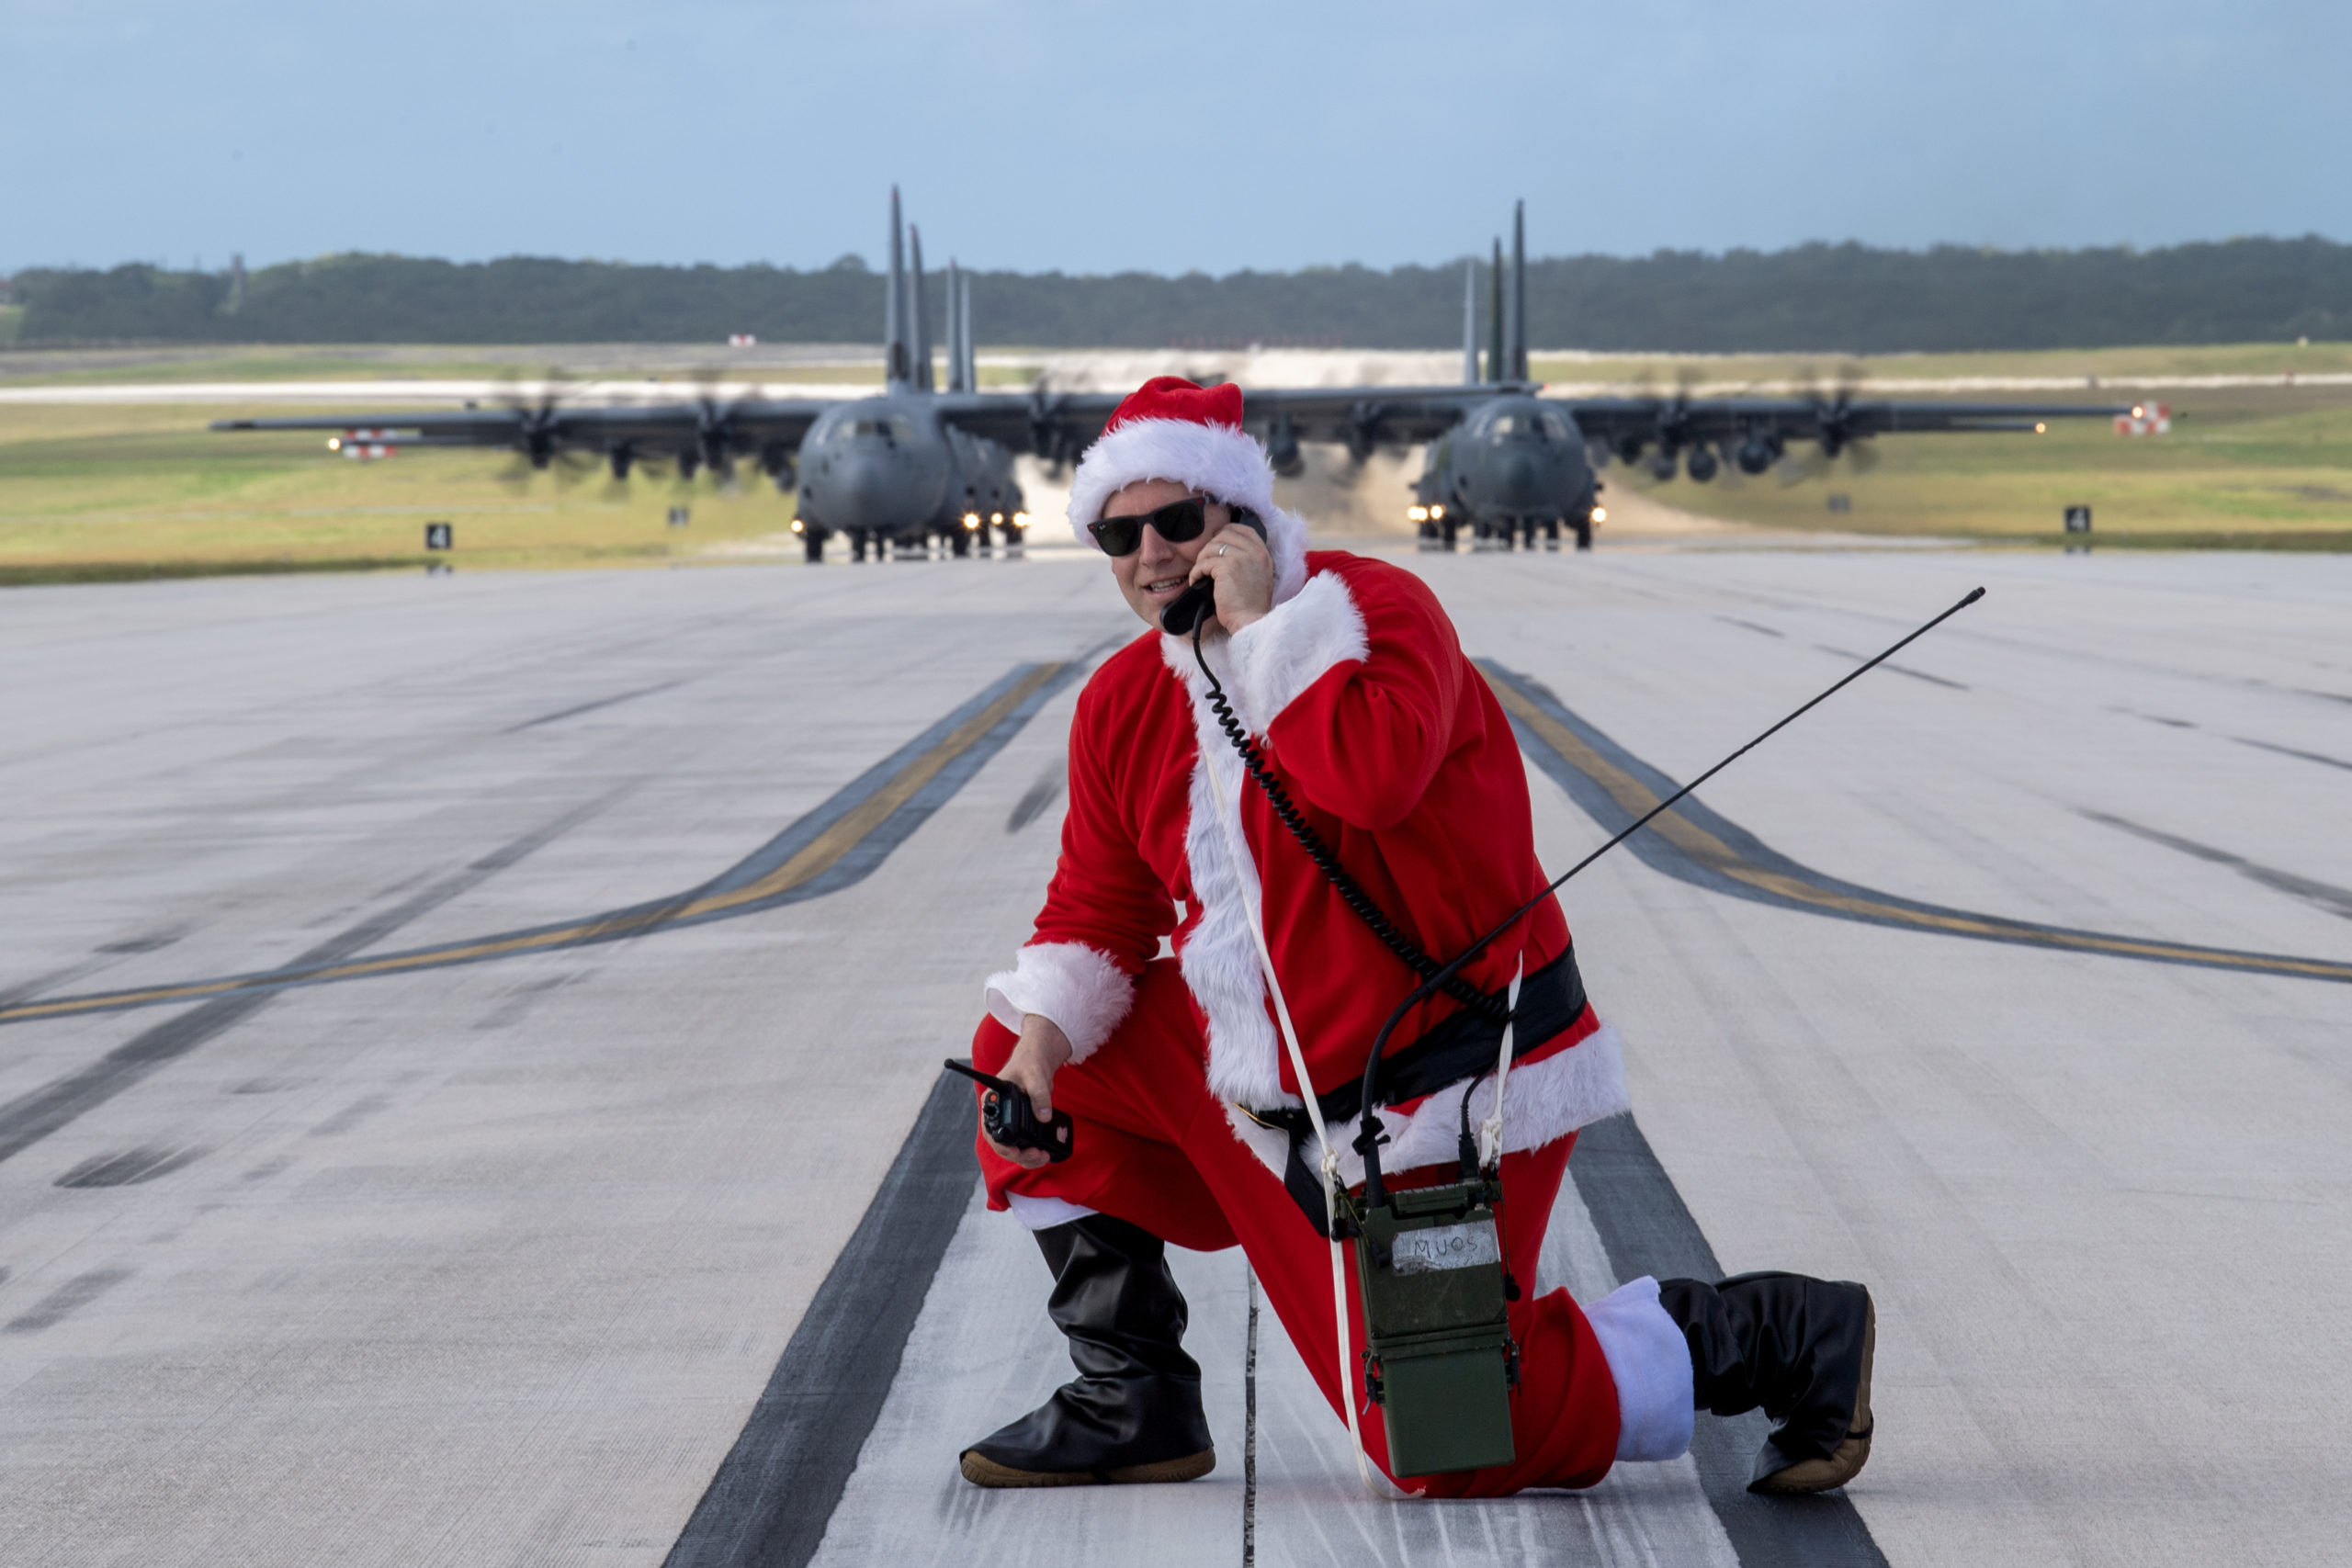 C-130s to Bring Holiday Cheer and 84,000 Pounds of Supplies to Pacific Islands